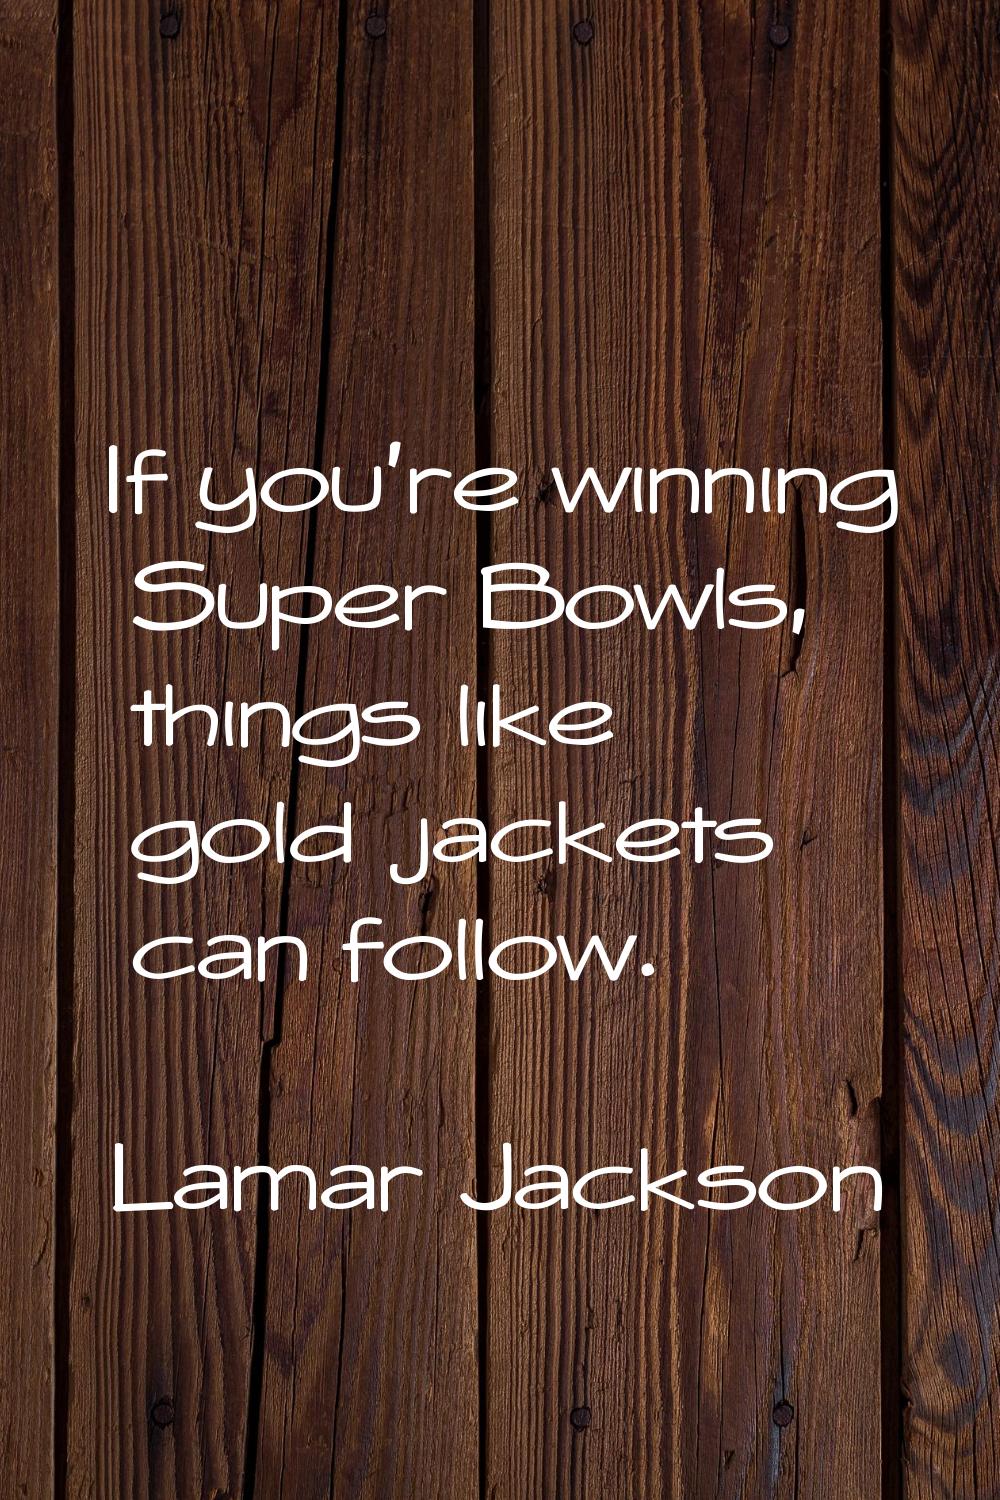 If you're winning Super Bowls, things like gold jackets can follow.